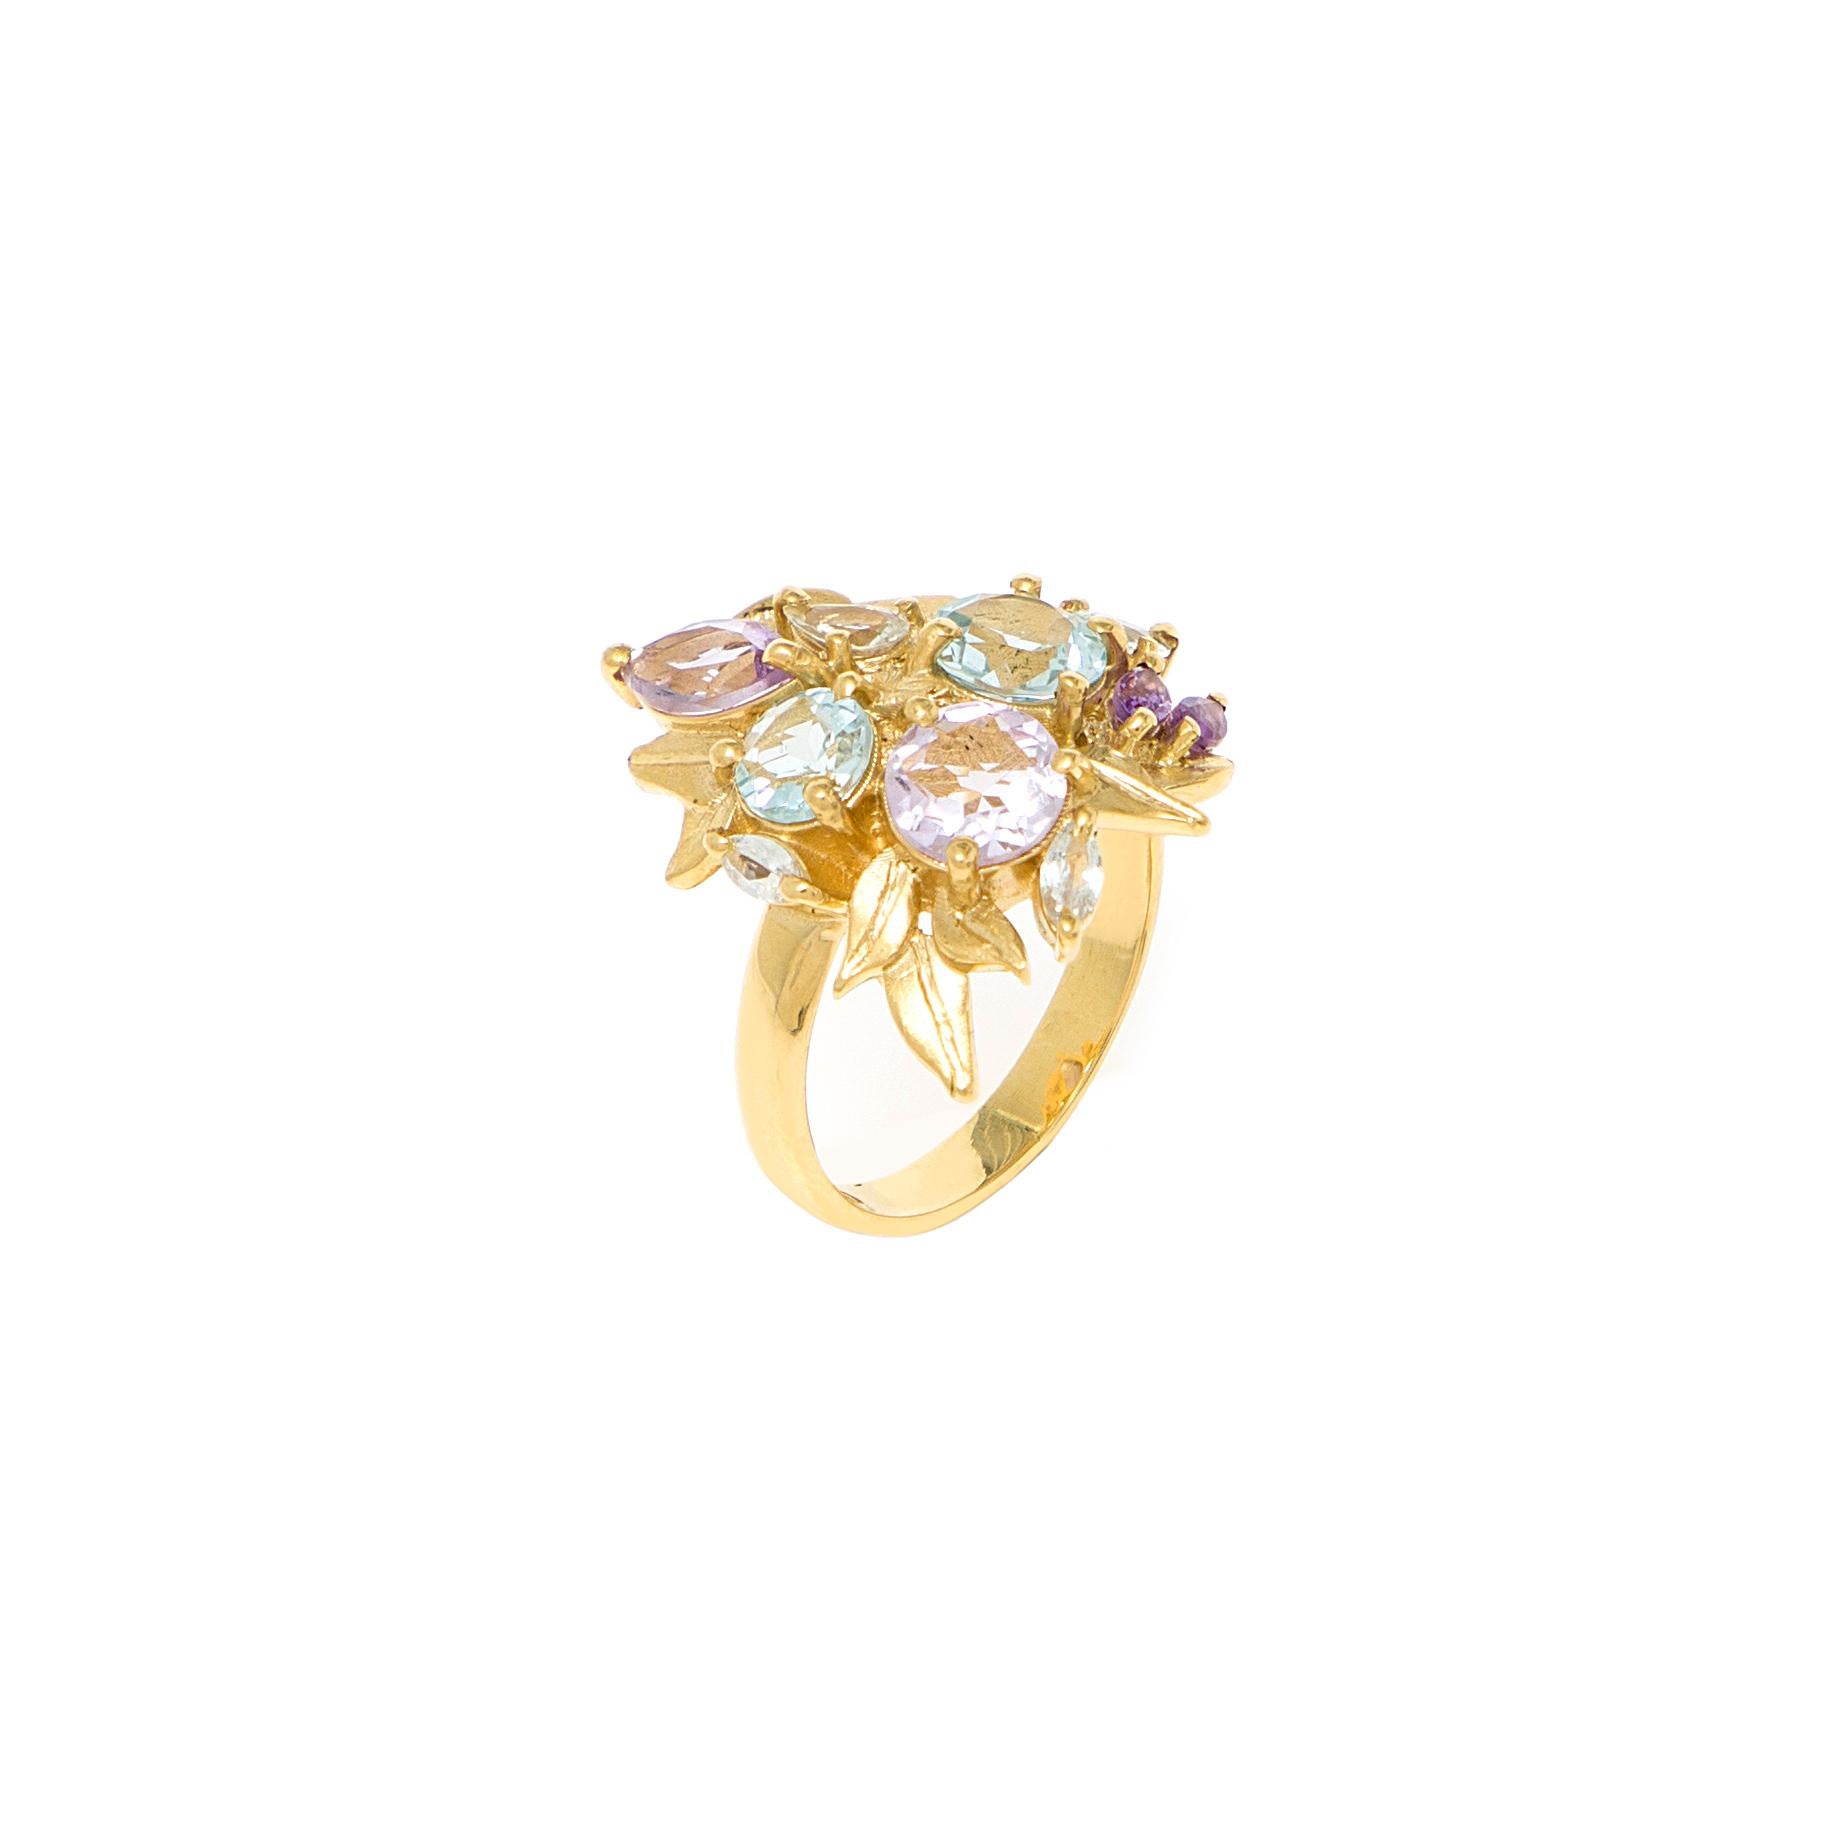 Ring
Gold 18K
Purple Amethysts, Pink Amethysts, White Sapphires, and Blue Topazes (Sky)
Handmade, polished finish and prong setting

At the time Van Gogh painted “Vase with Pink Roses” the artist was overflowing with life, optimism, and hope.  His